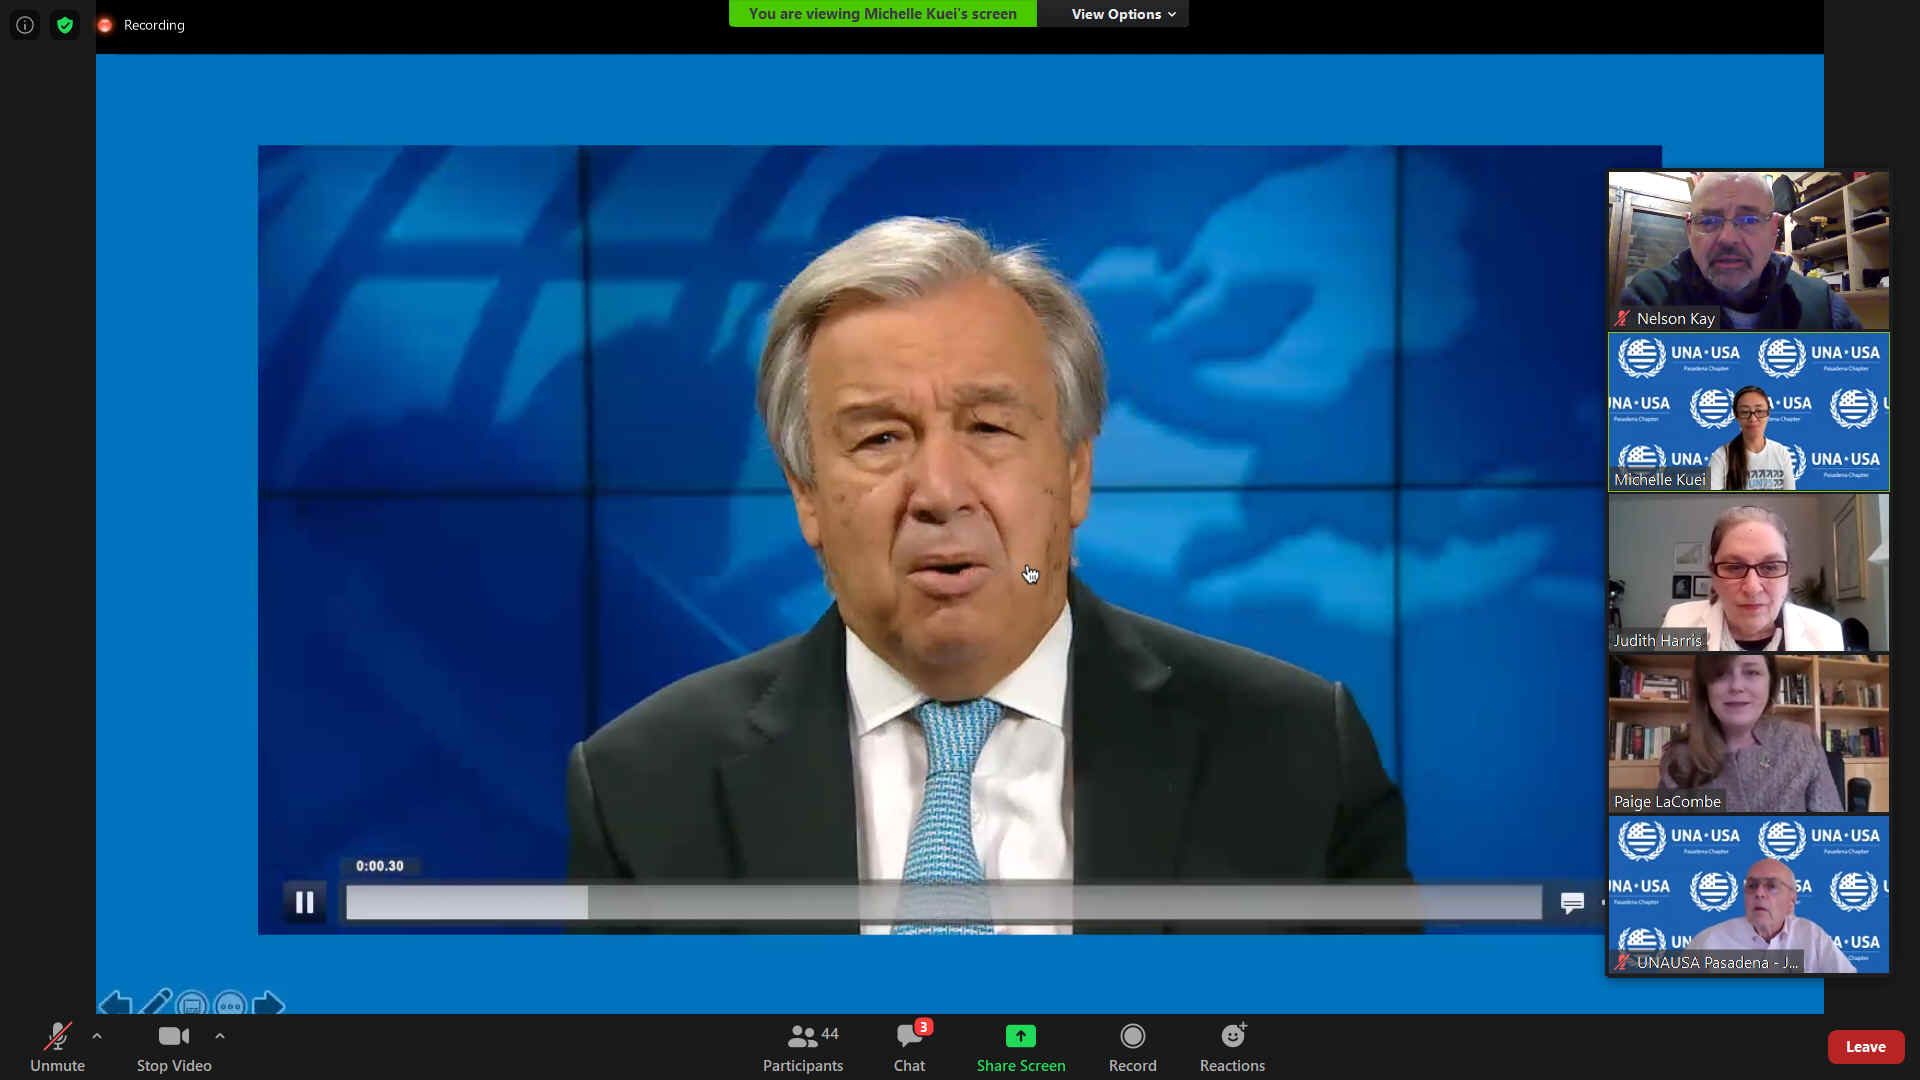 António Guterres is the secretary general of the United Nations